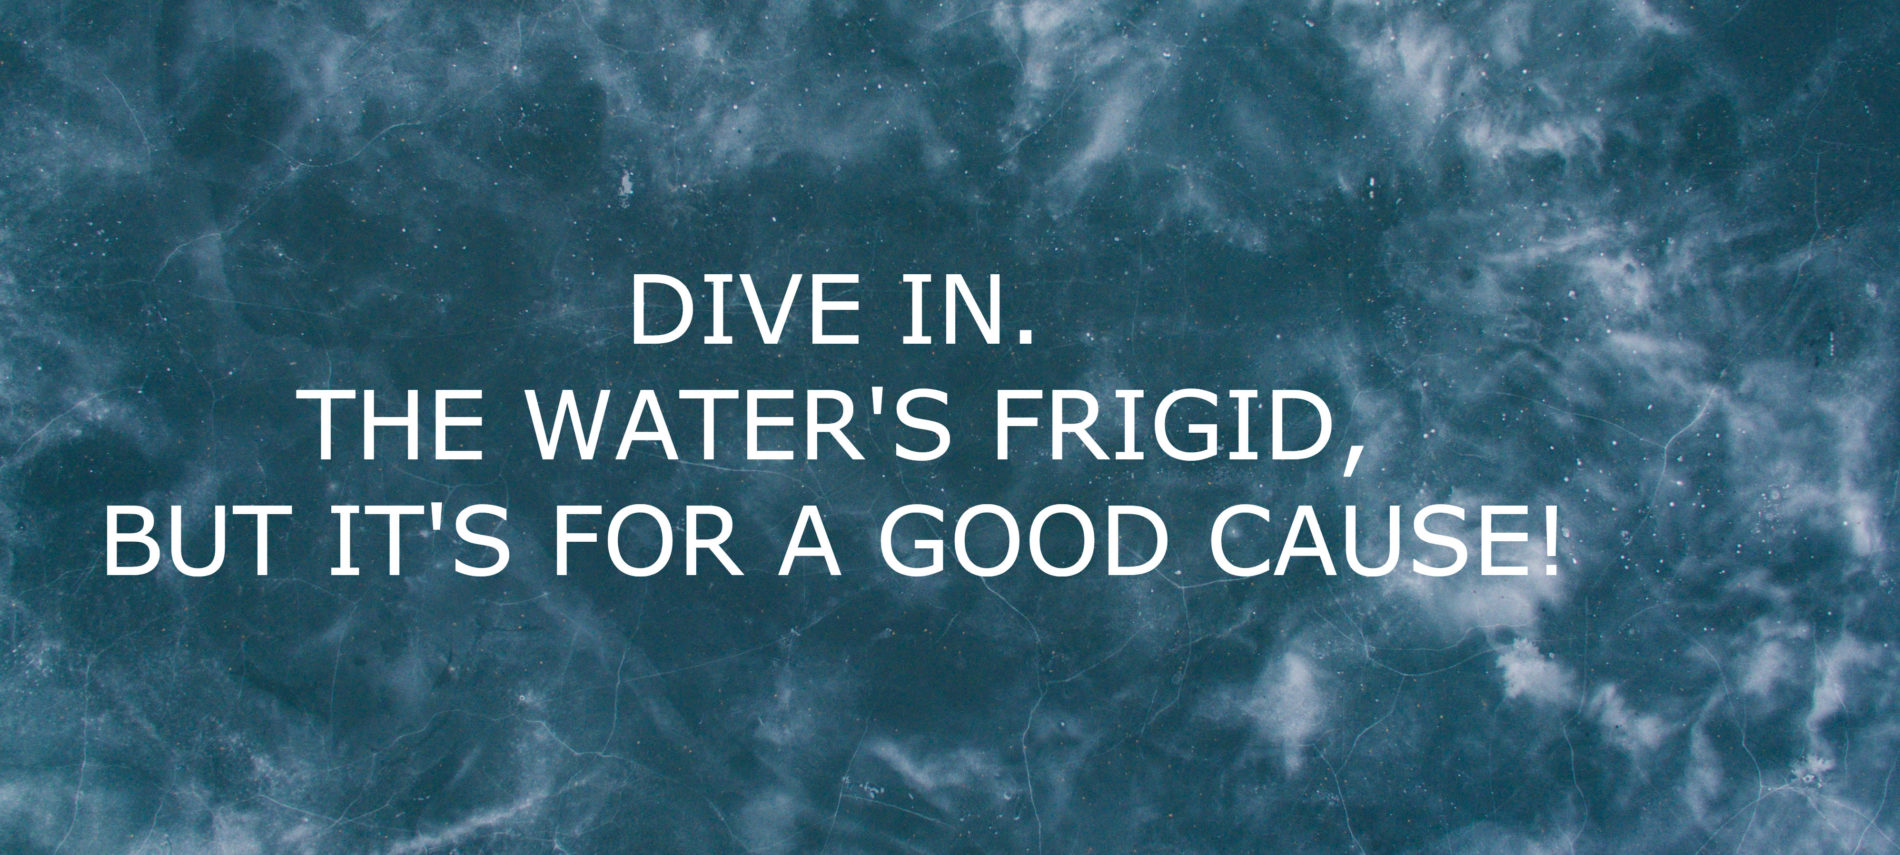 frozen water with cracks in the ice; title reads: Dive In. The water's frigid, but it's for a good cause."